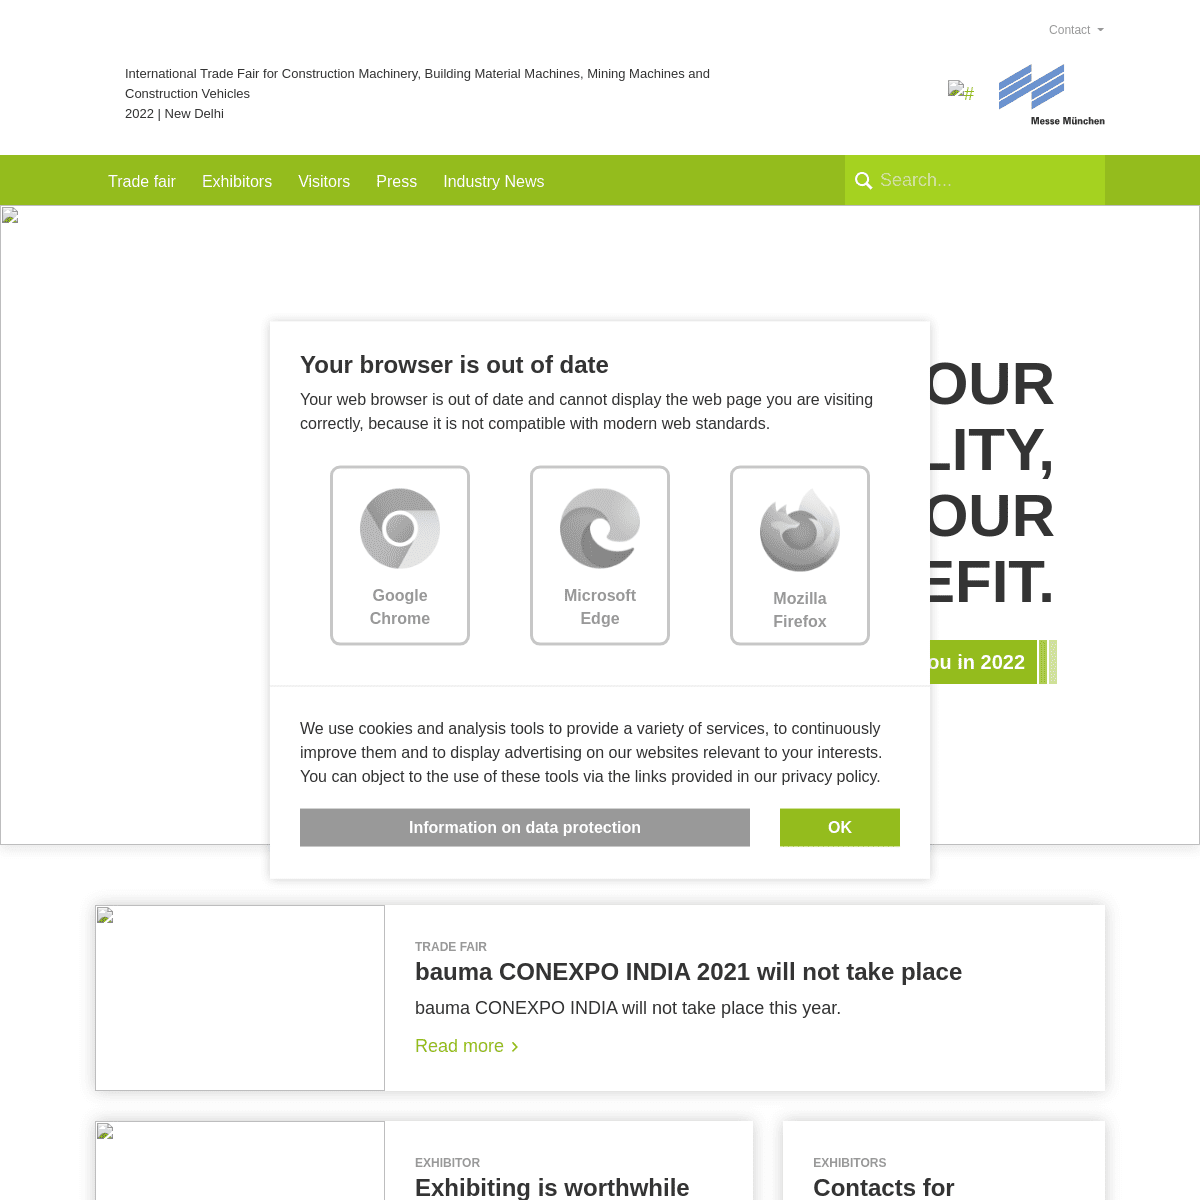 A complete backup of https://bcindia.com